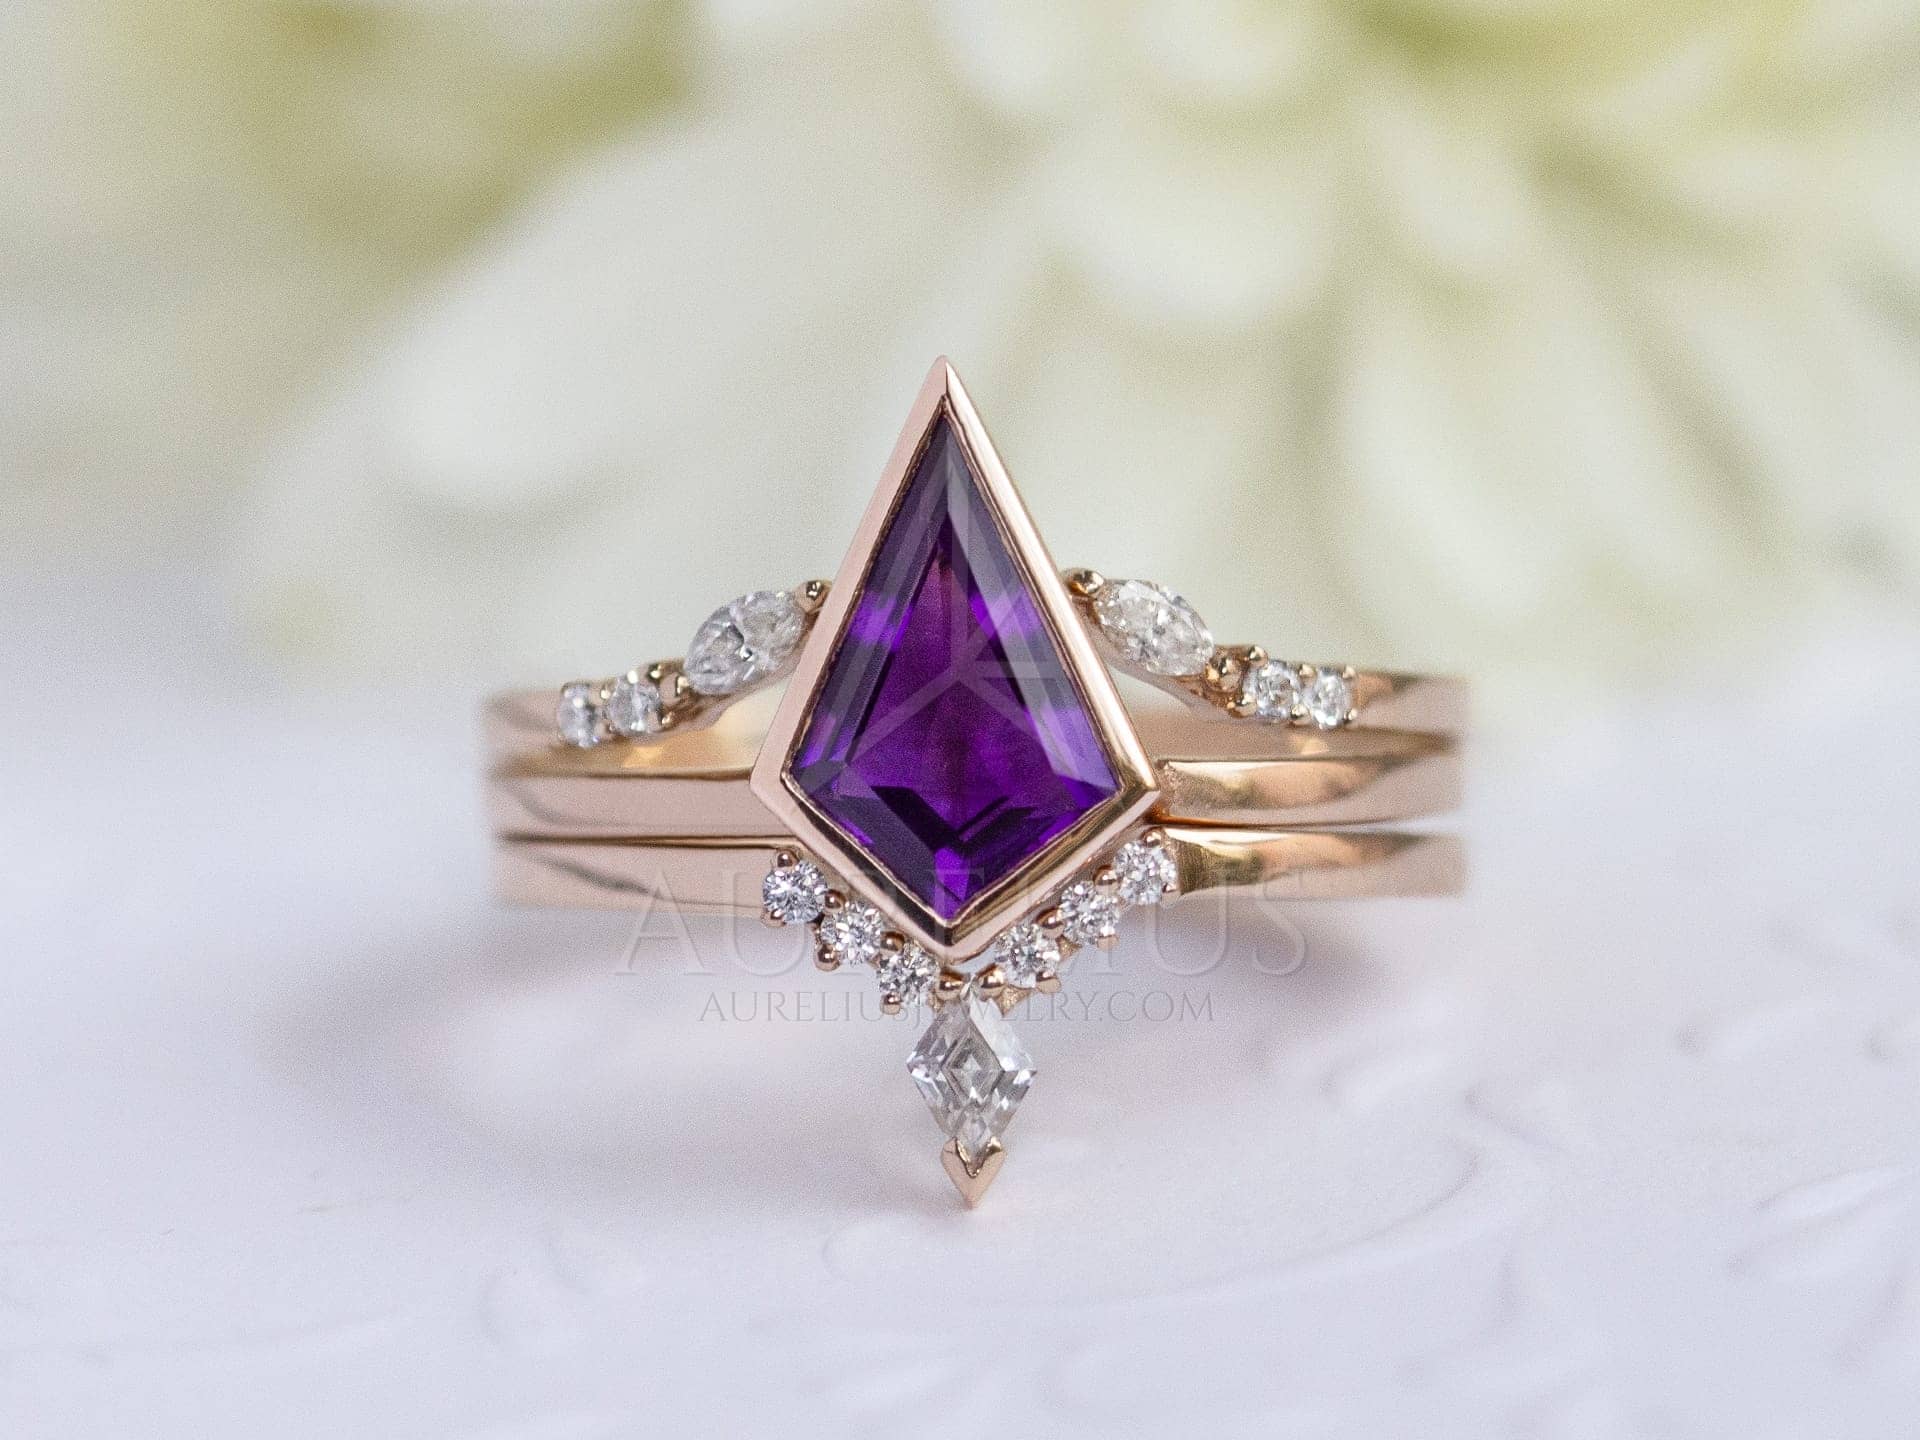 Unique Oval Cut Amethyst Engagement Ring 10k Rose Gold Vintage Marquise  Moissanite Wedding Rings Floral Natural Gemstone Anniversary Gift - Etsy